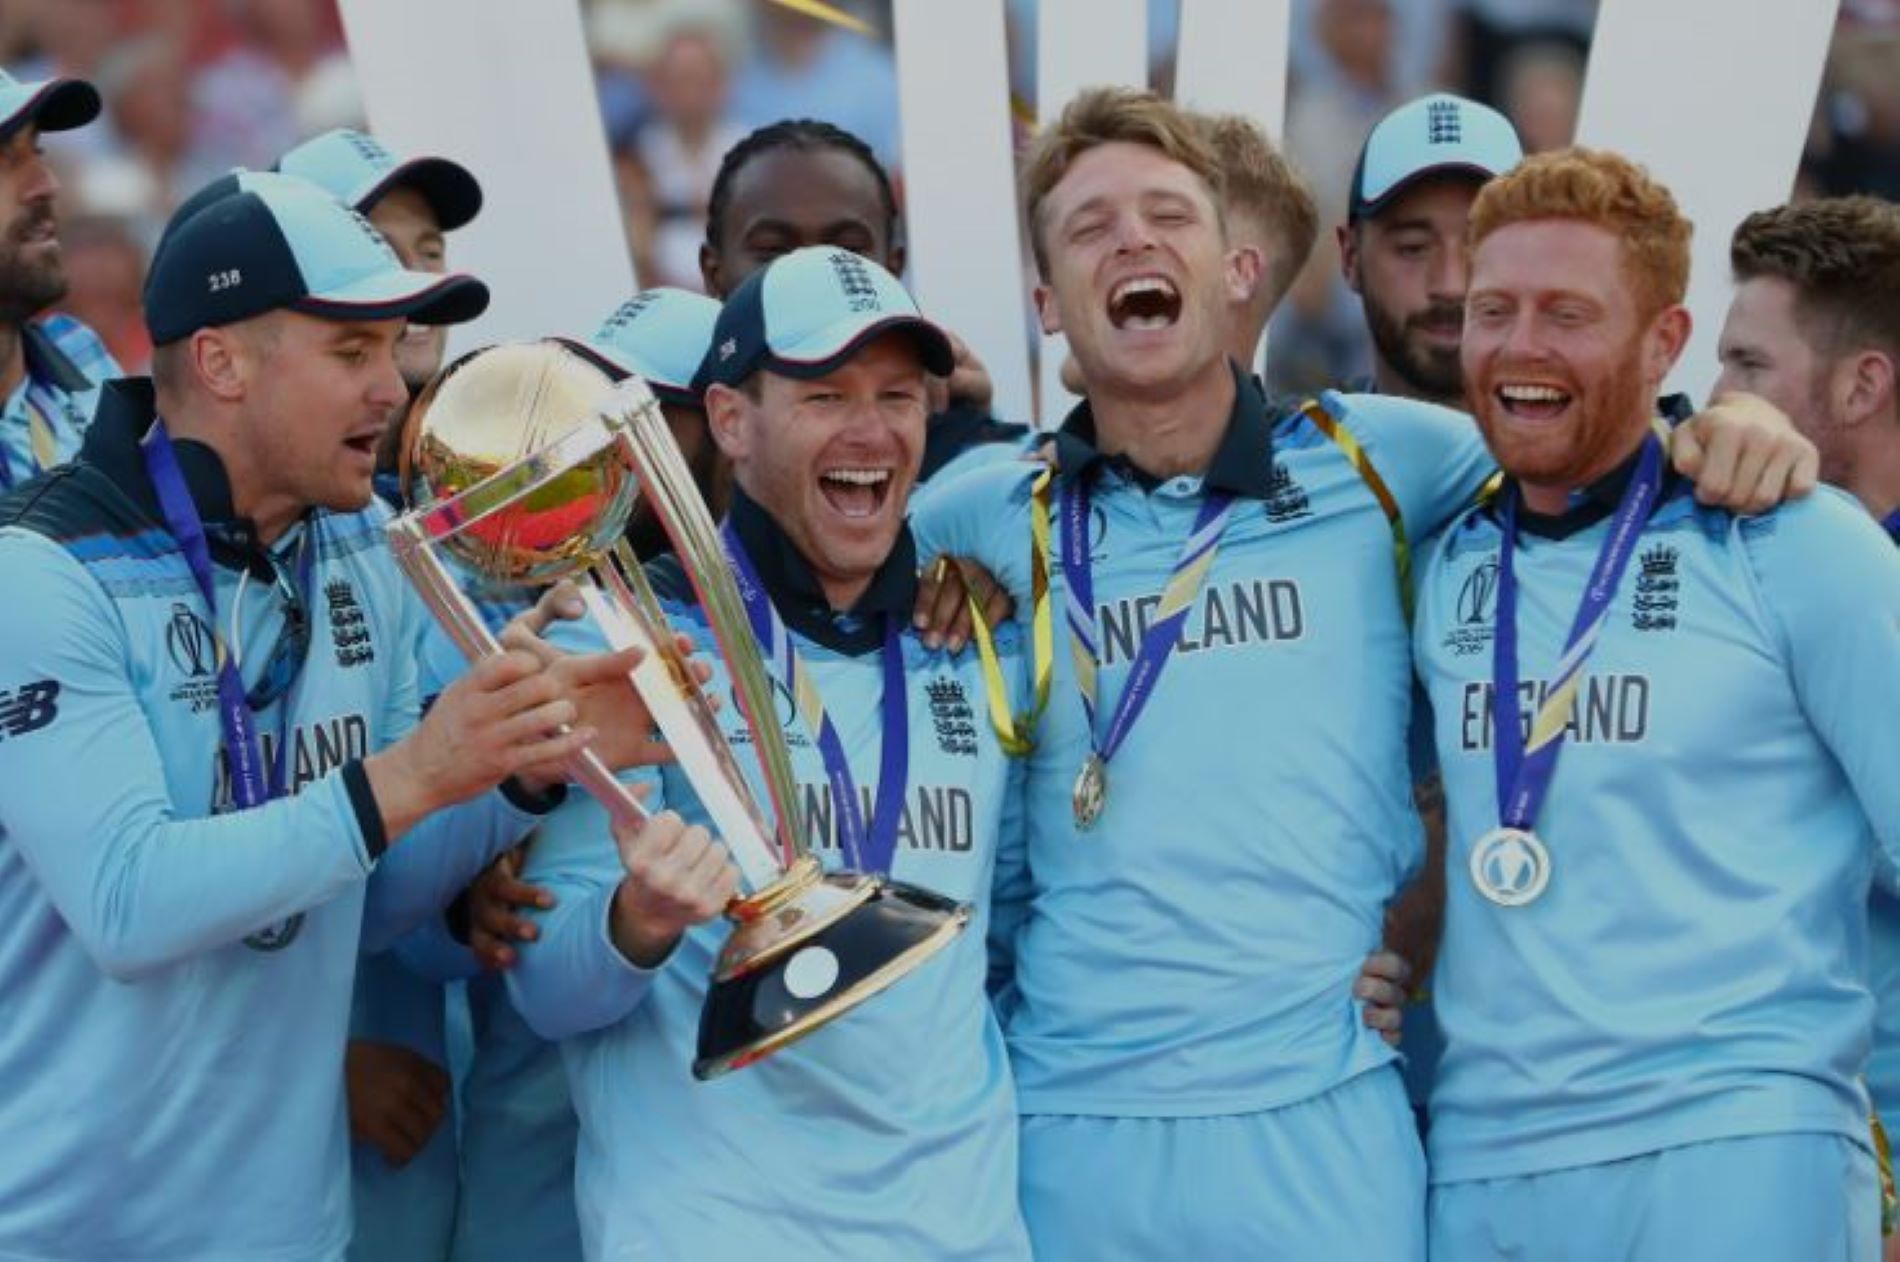 A jubilant England team after winning the 2019 World Cup.